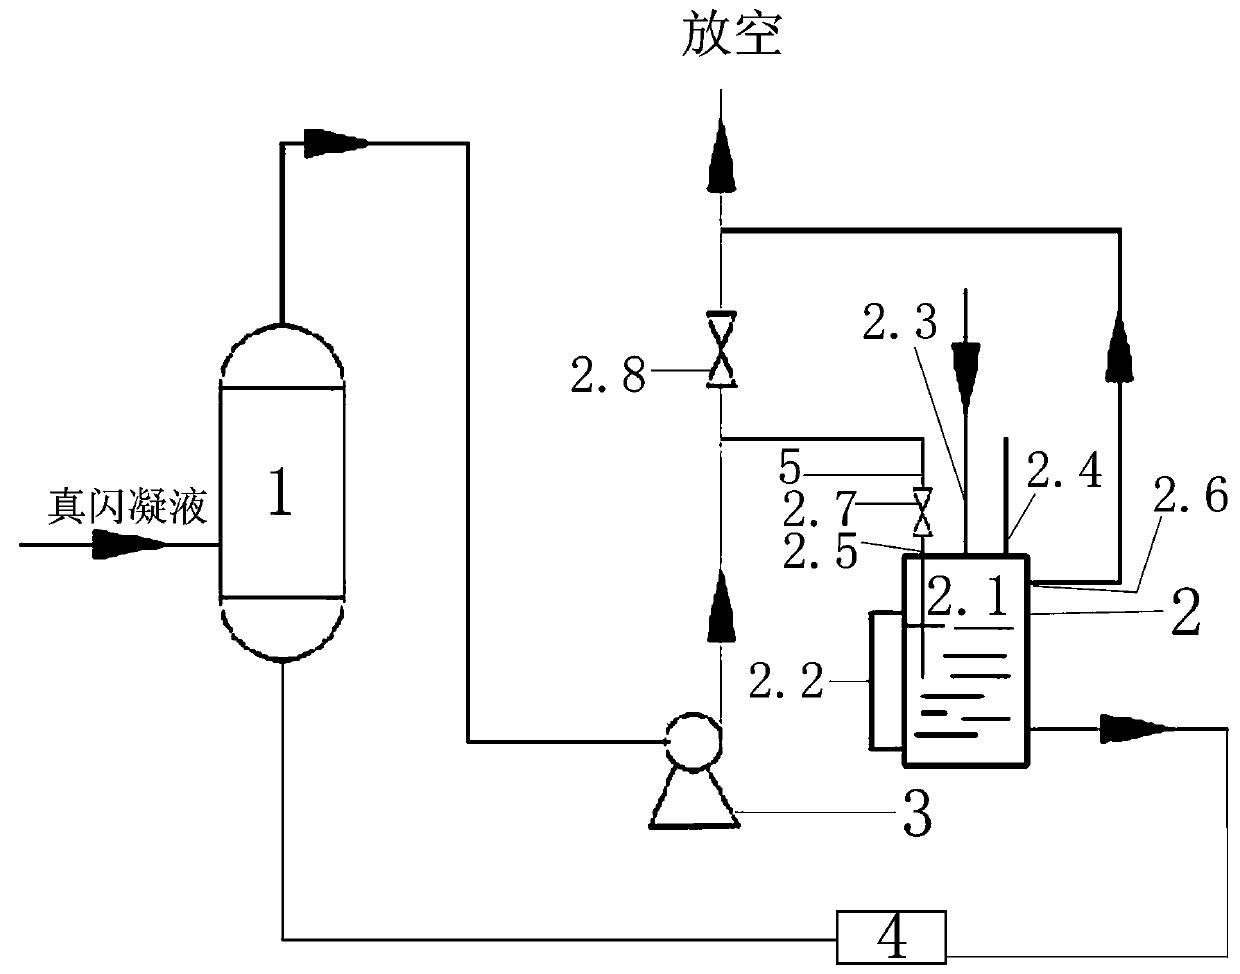 Entrained-flow bed coal gasification flashing noncondensable gas purification system and method